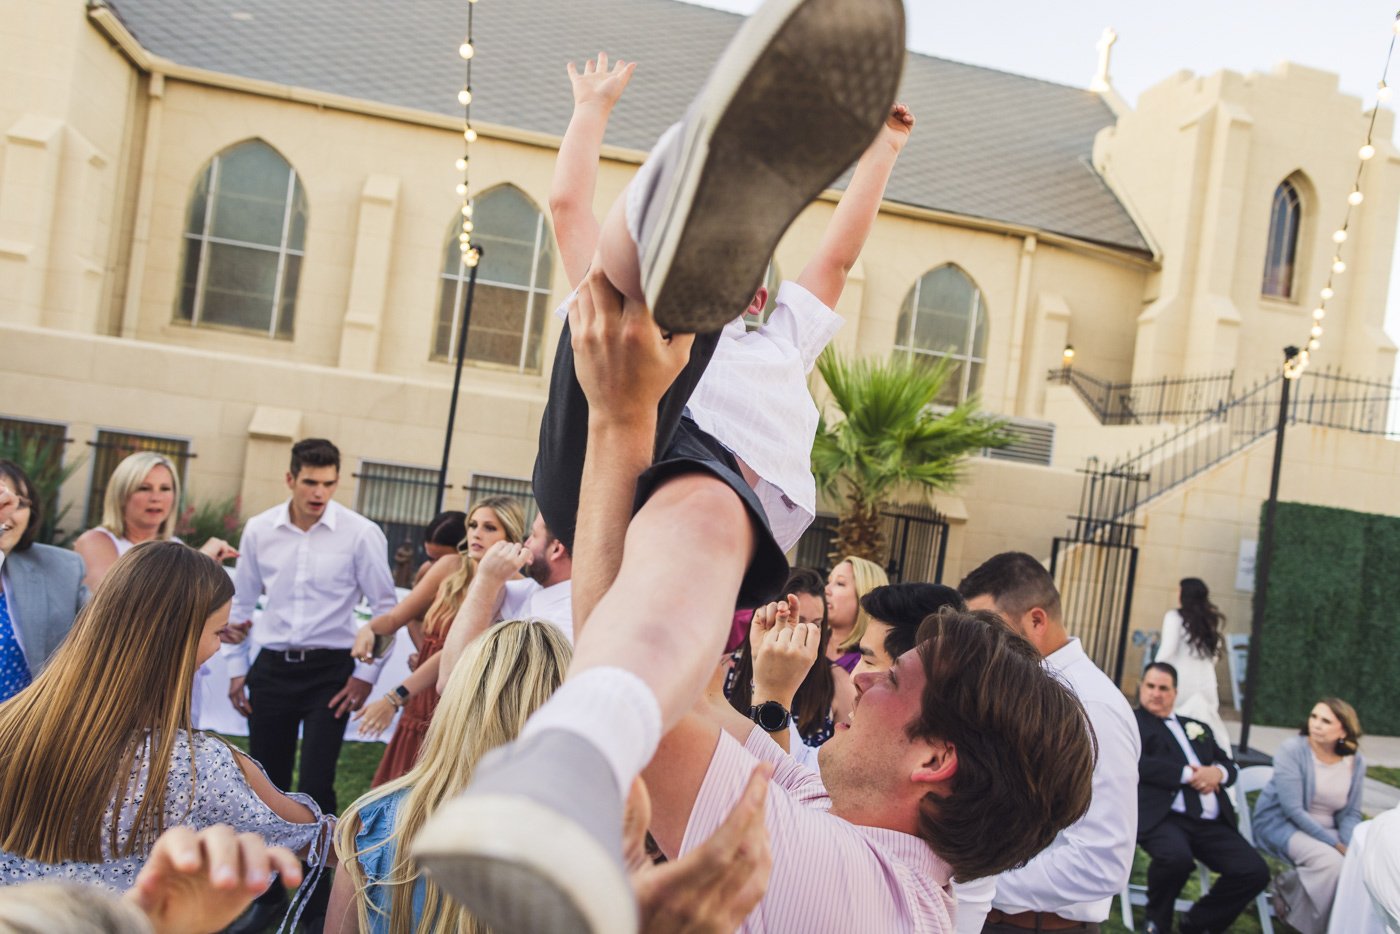 kid being tossed in air during wedding reception